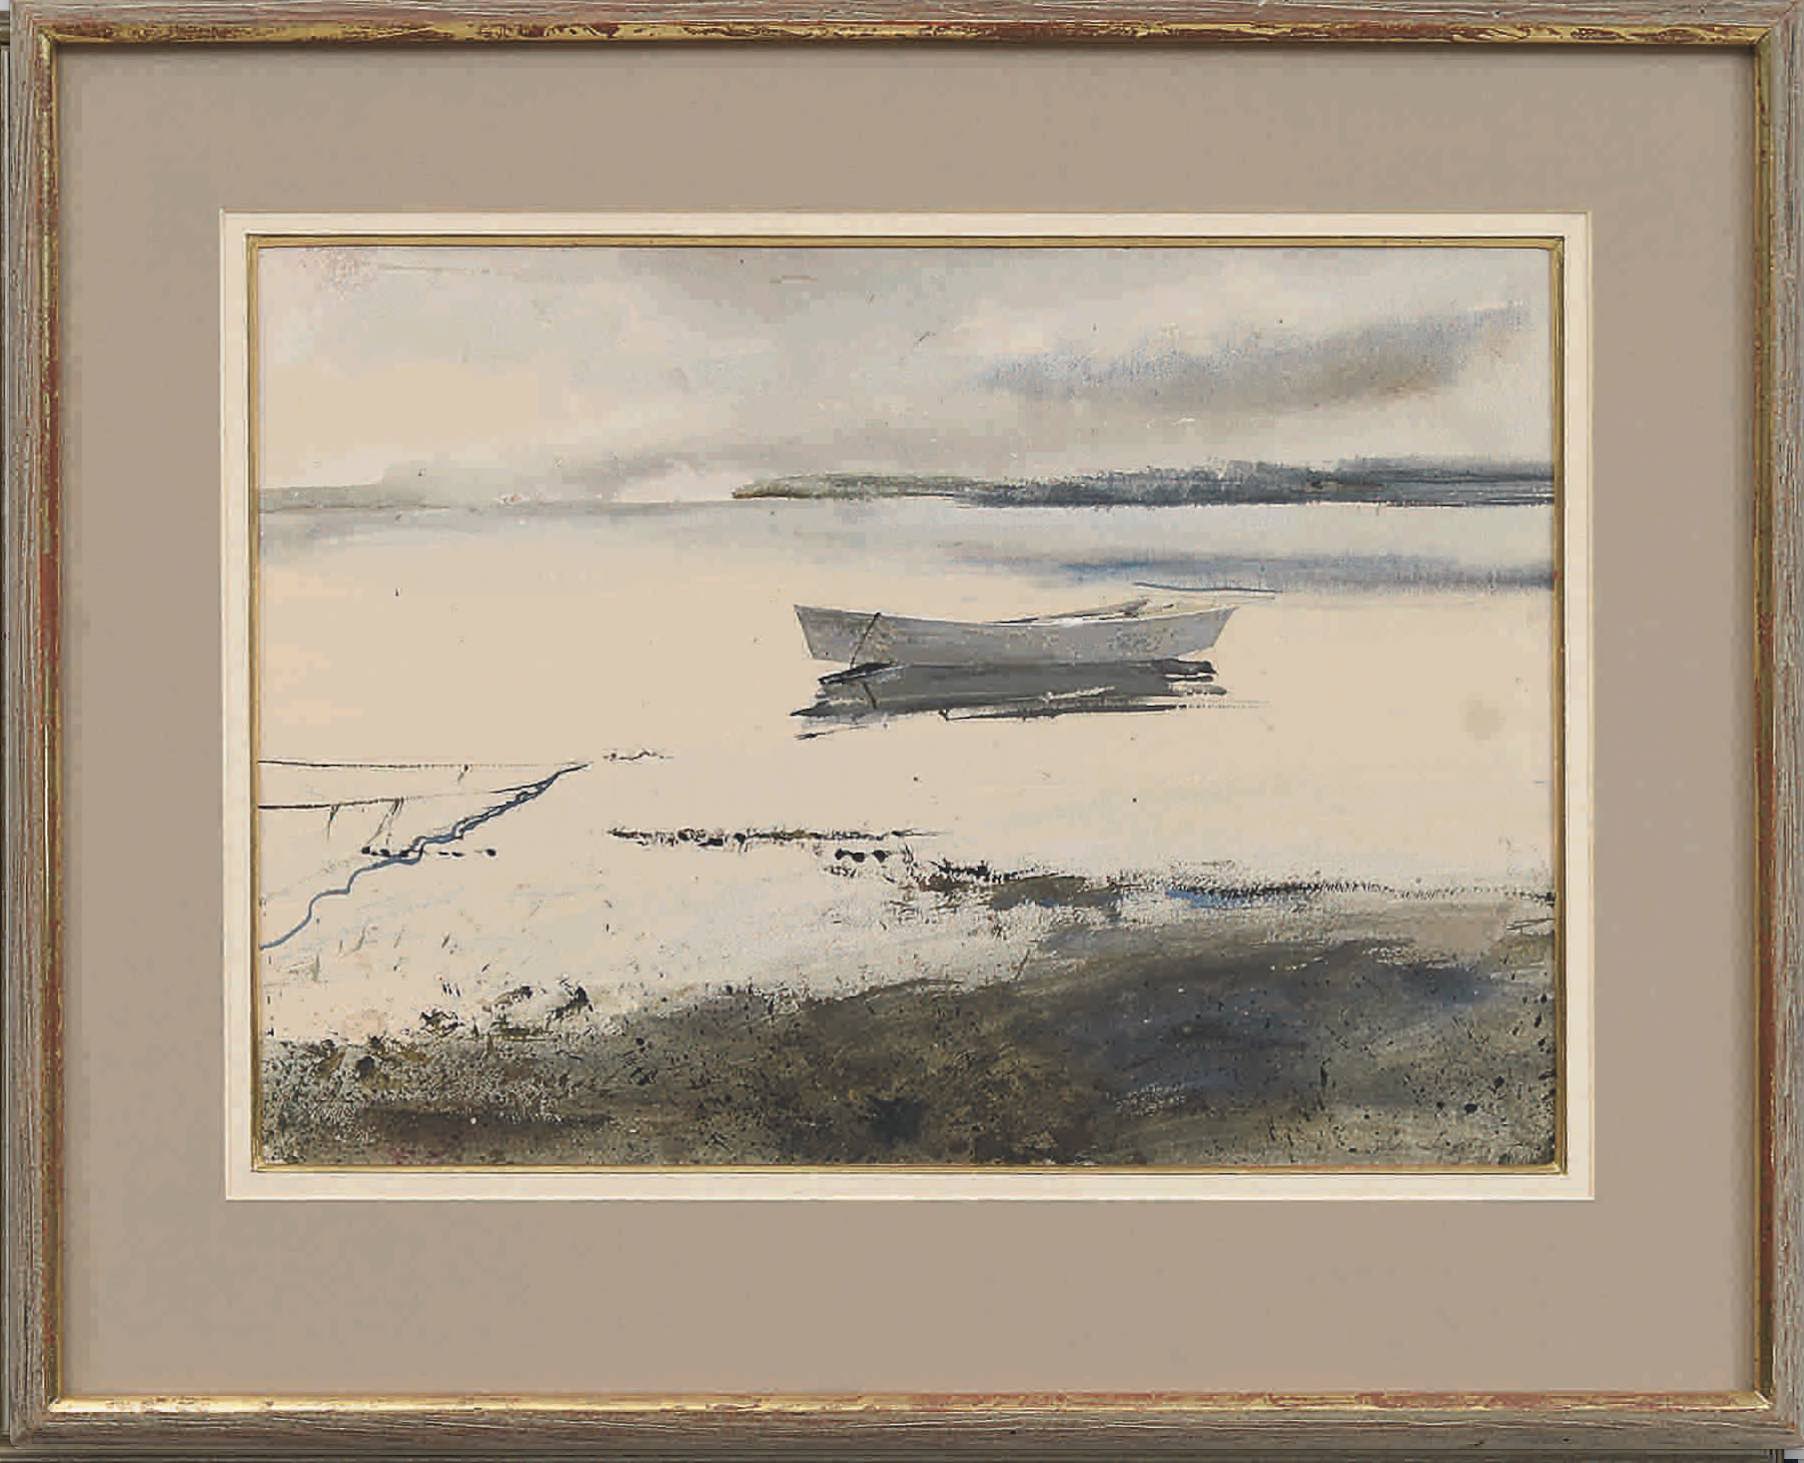 Andrew Newell Wyeth's "River Greys" Realized $66,953.